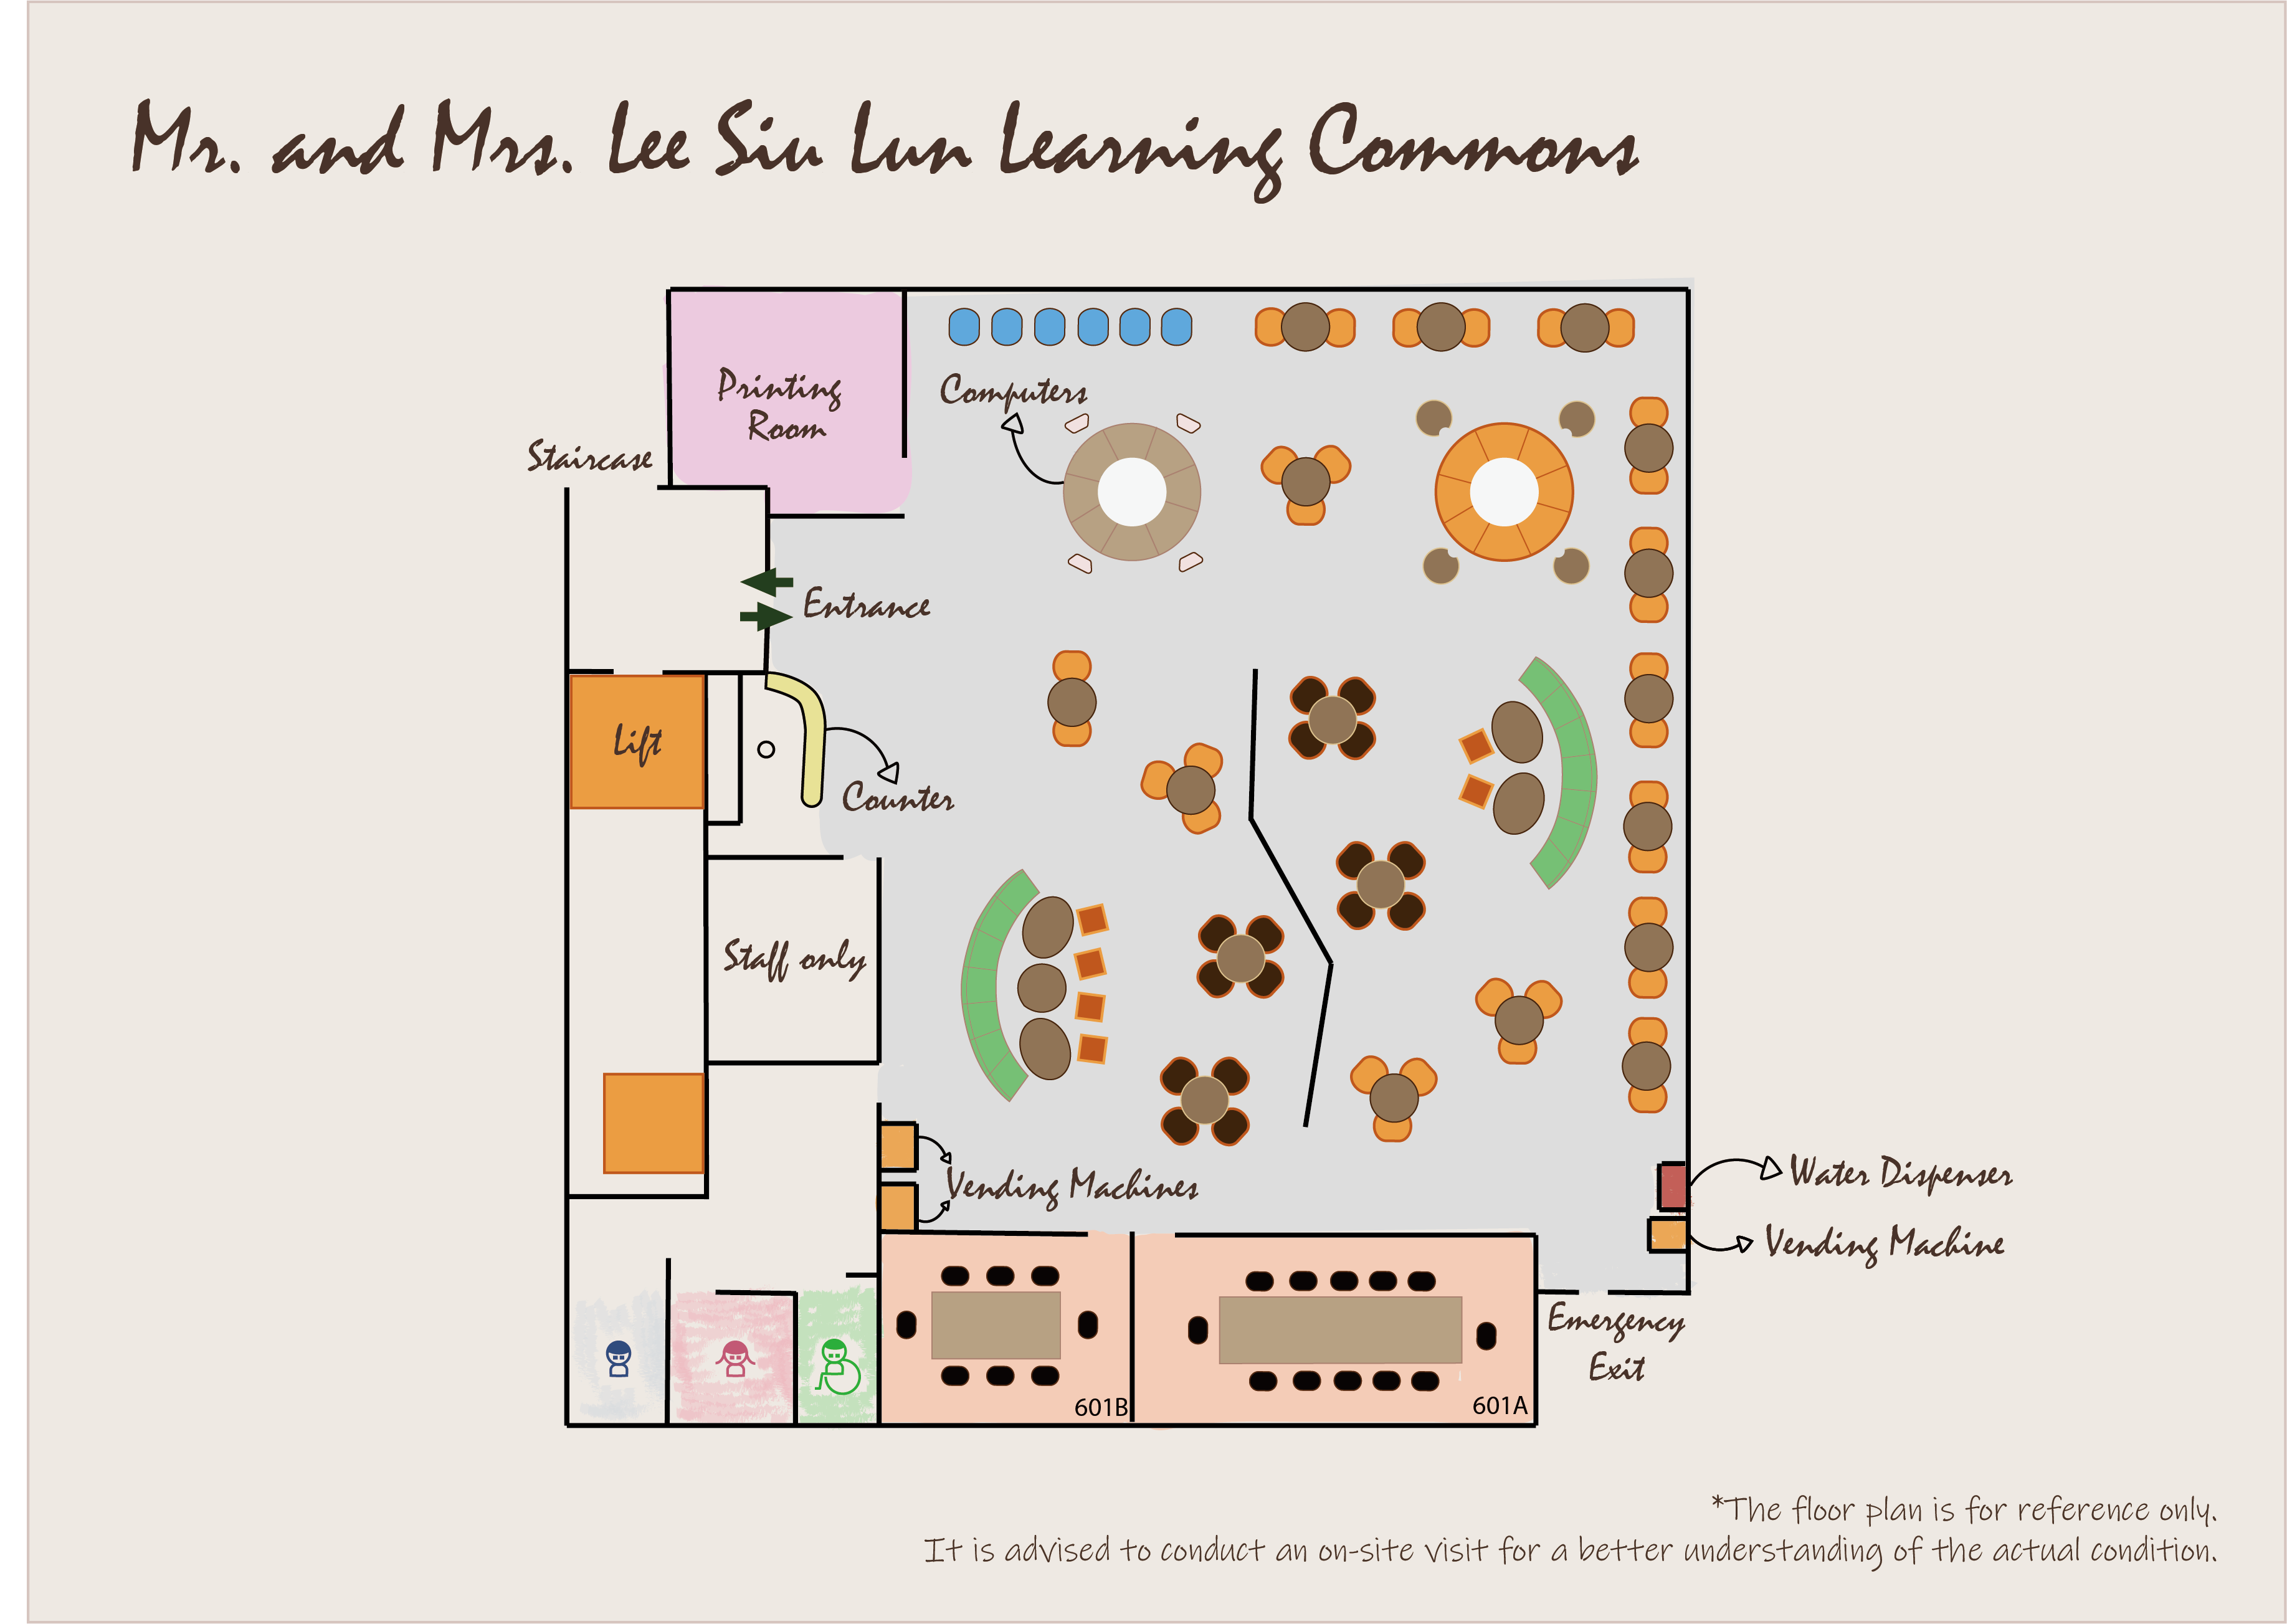 Mr. and Mrs. Lee Siu Lun Learning Commons